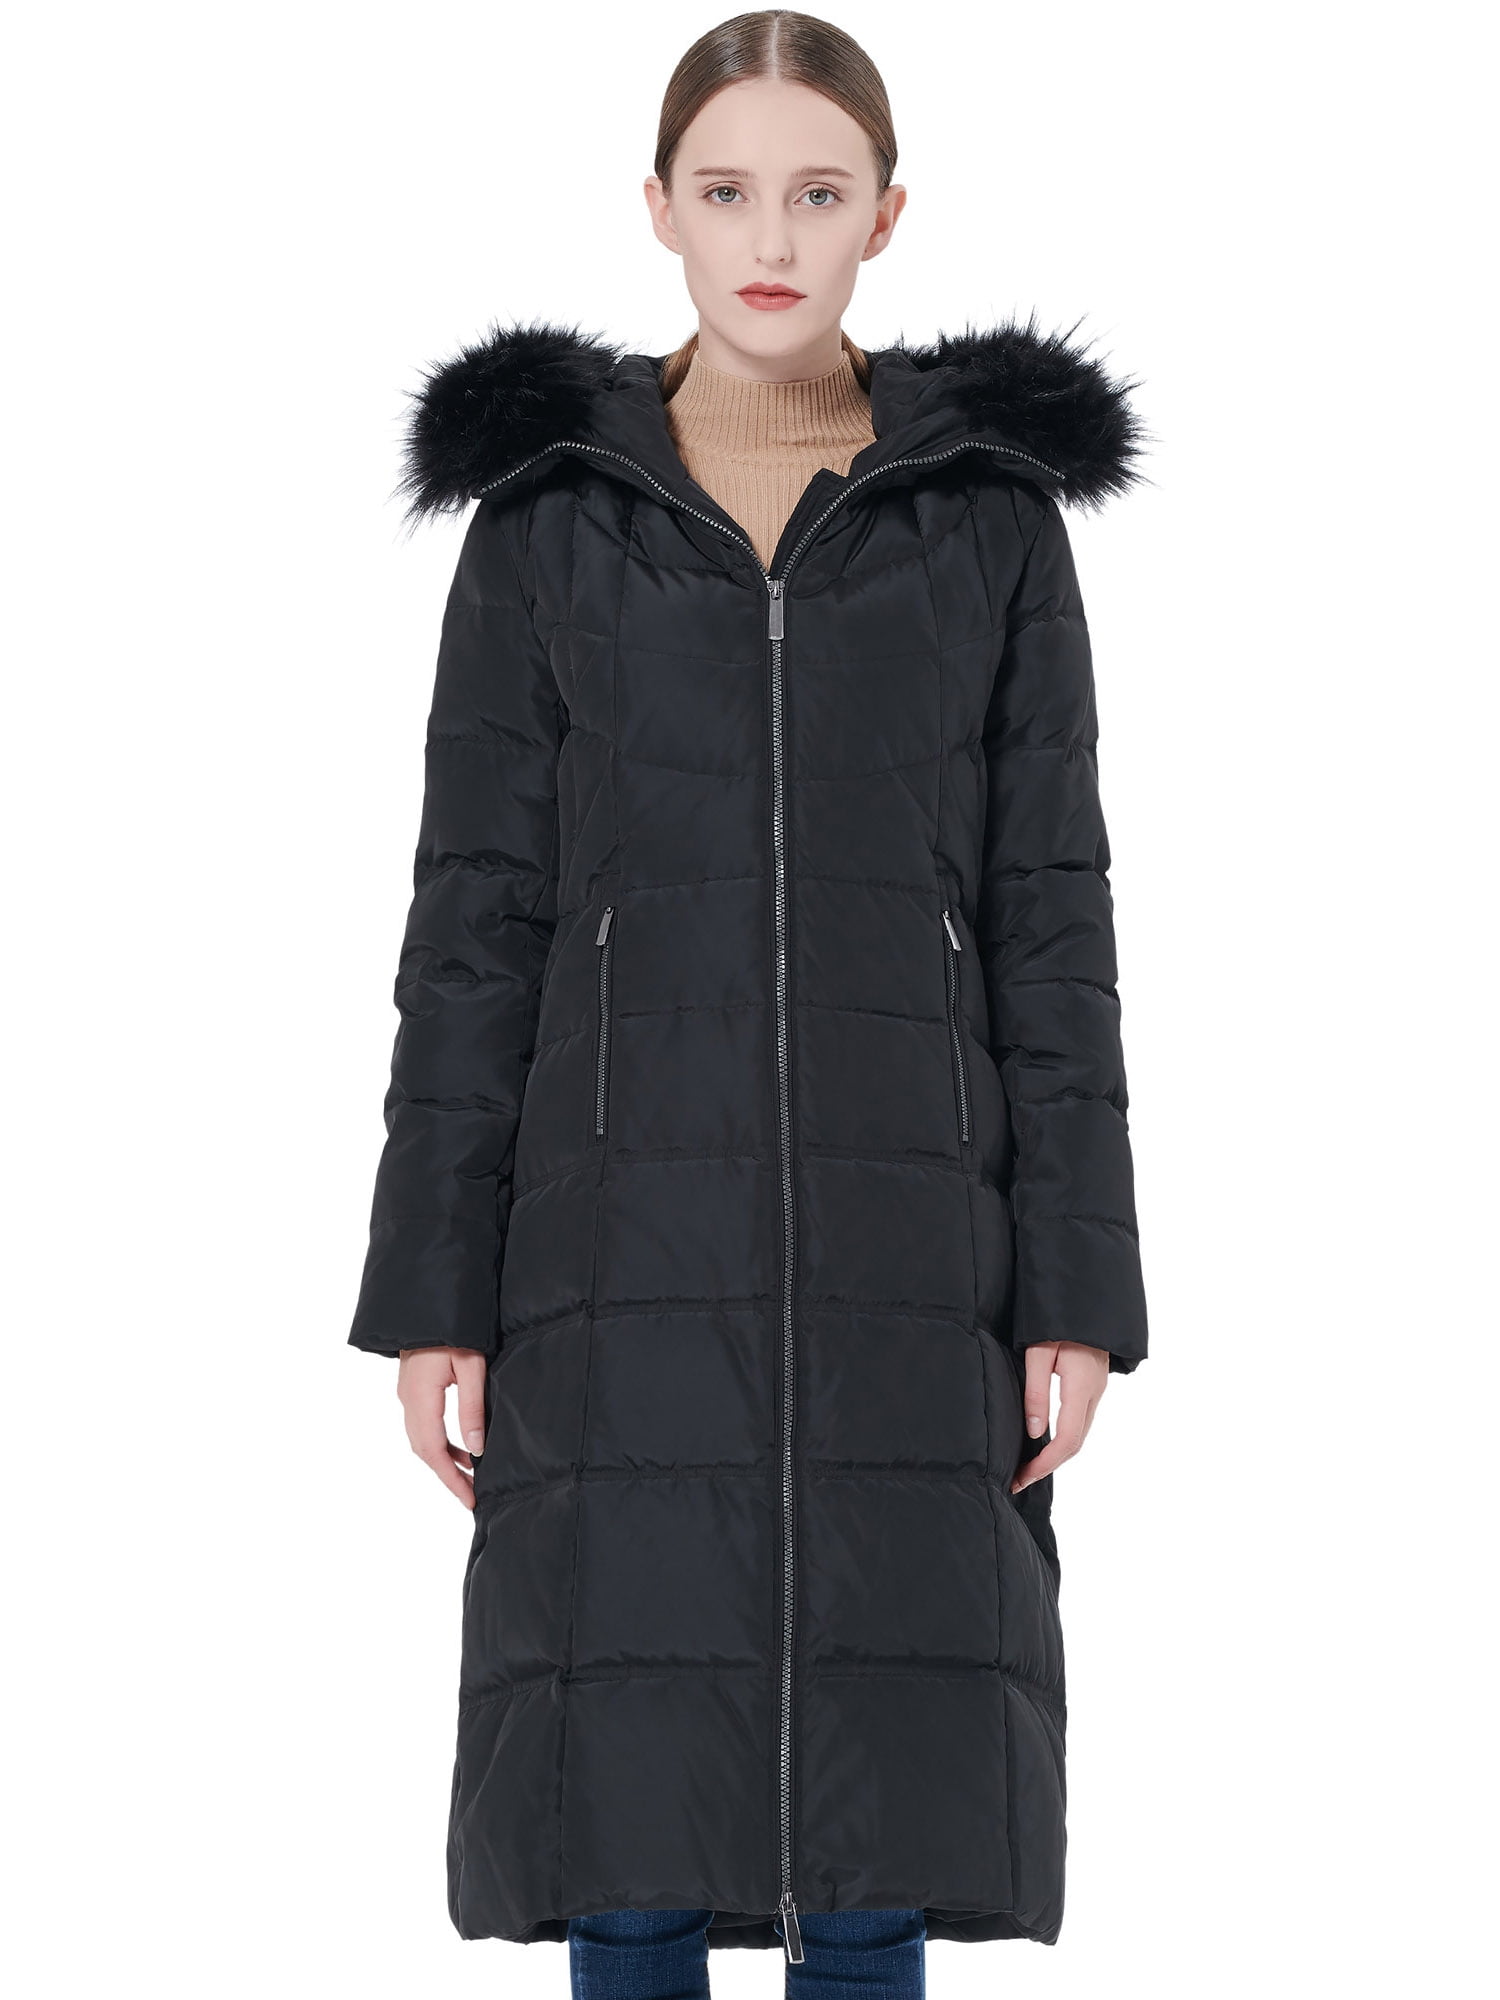 Orolay Women's Thickened Puffer Down Jacket Winter Hooded Coat ...